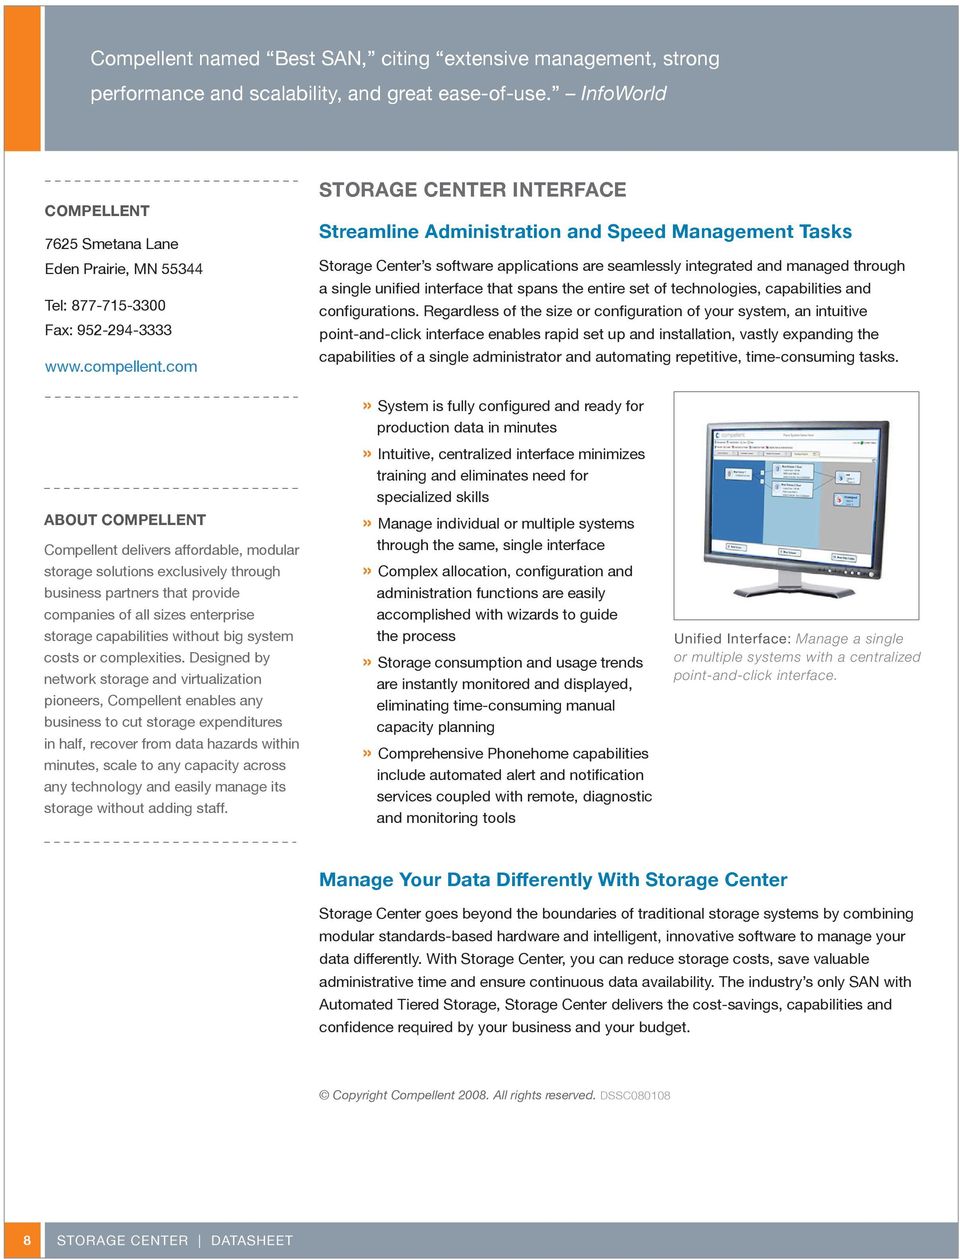 com STORAGE CENTER INTERFACE Streamline Administration and Speed Management Tasks Storage Center s software applications are seamlessly integrated and managed through a single unified interface that